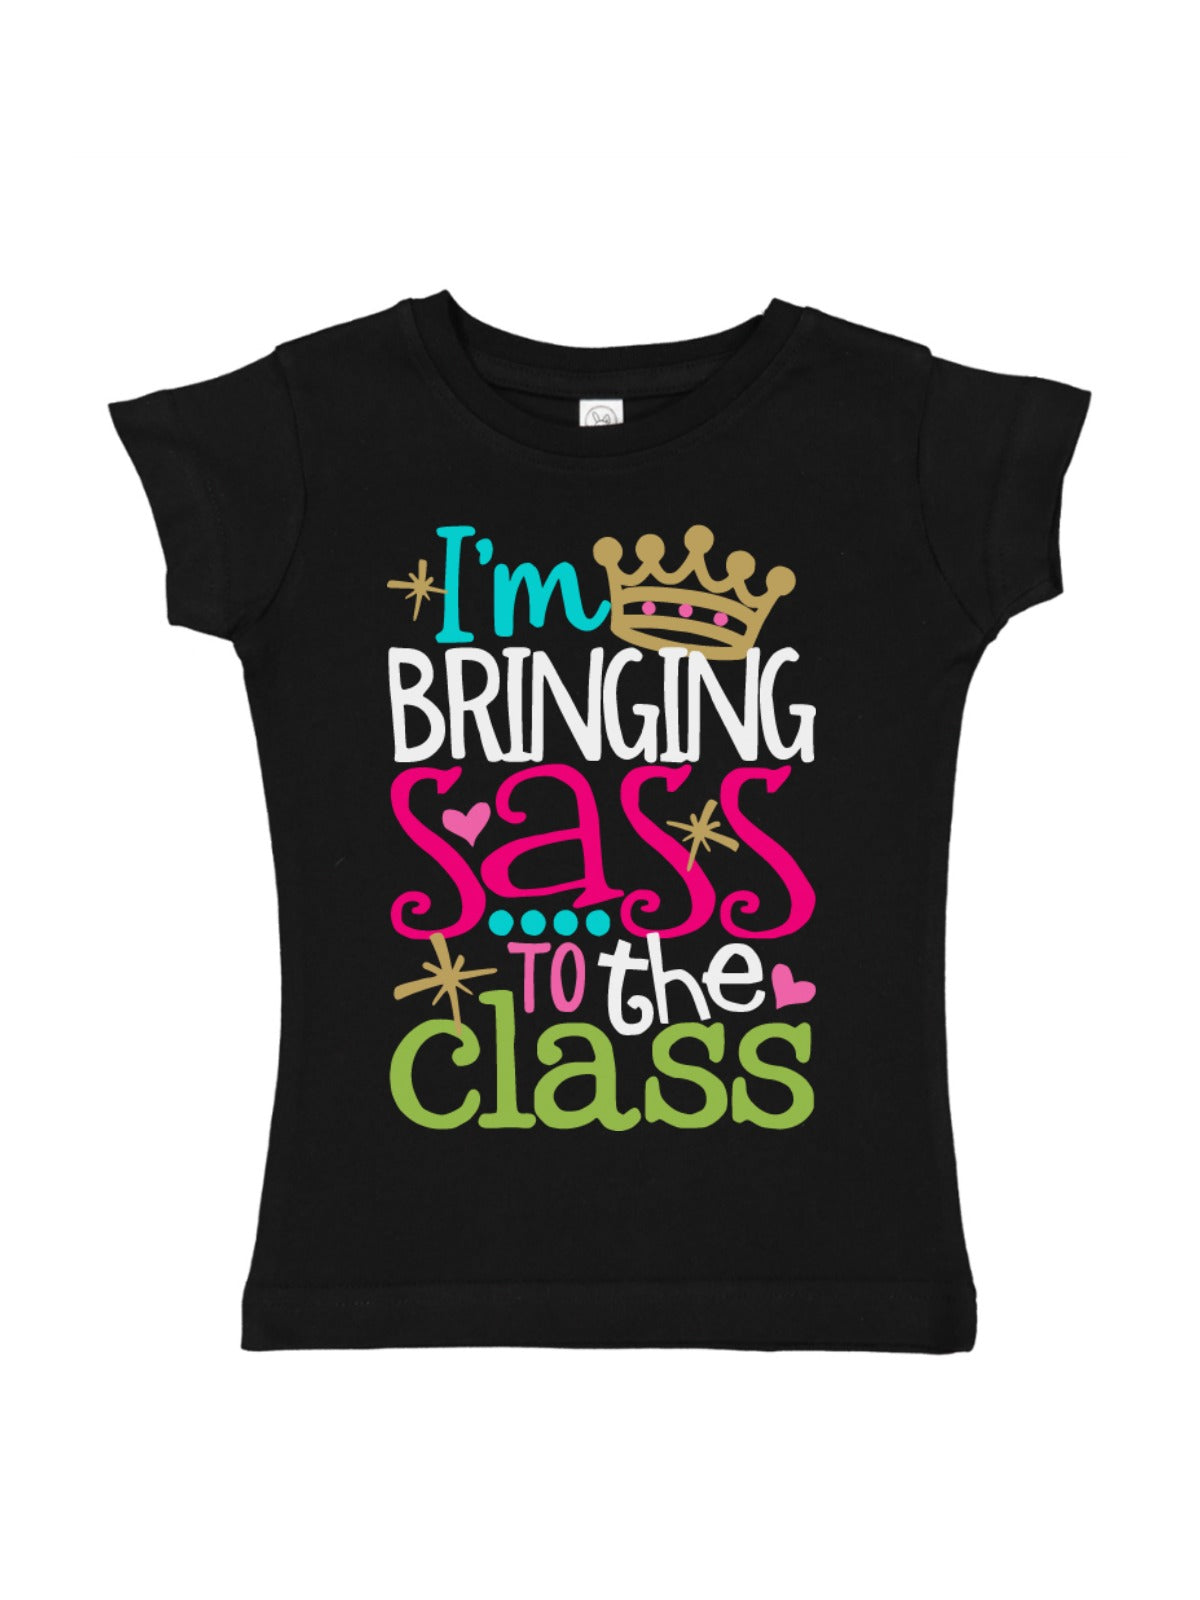 I'm Bringing Sass to the Class Girls Back to School Shirt